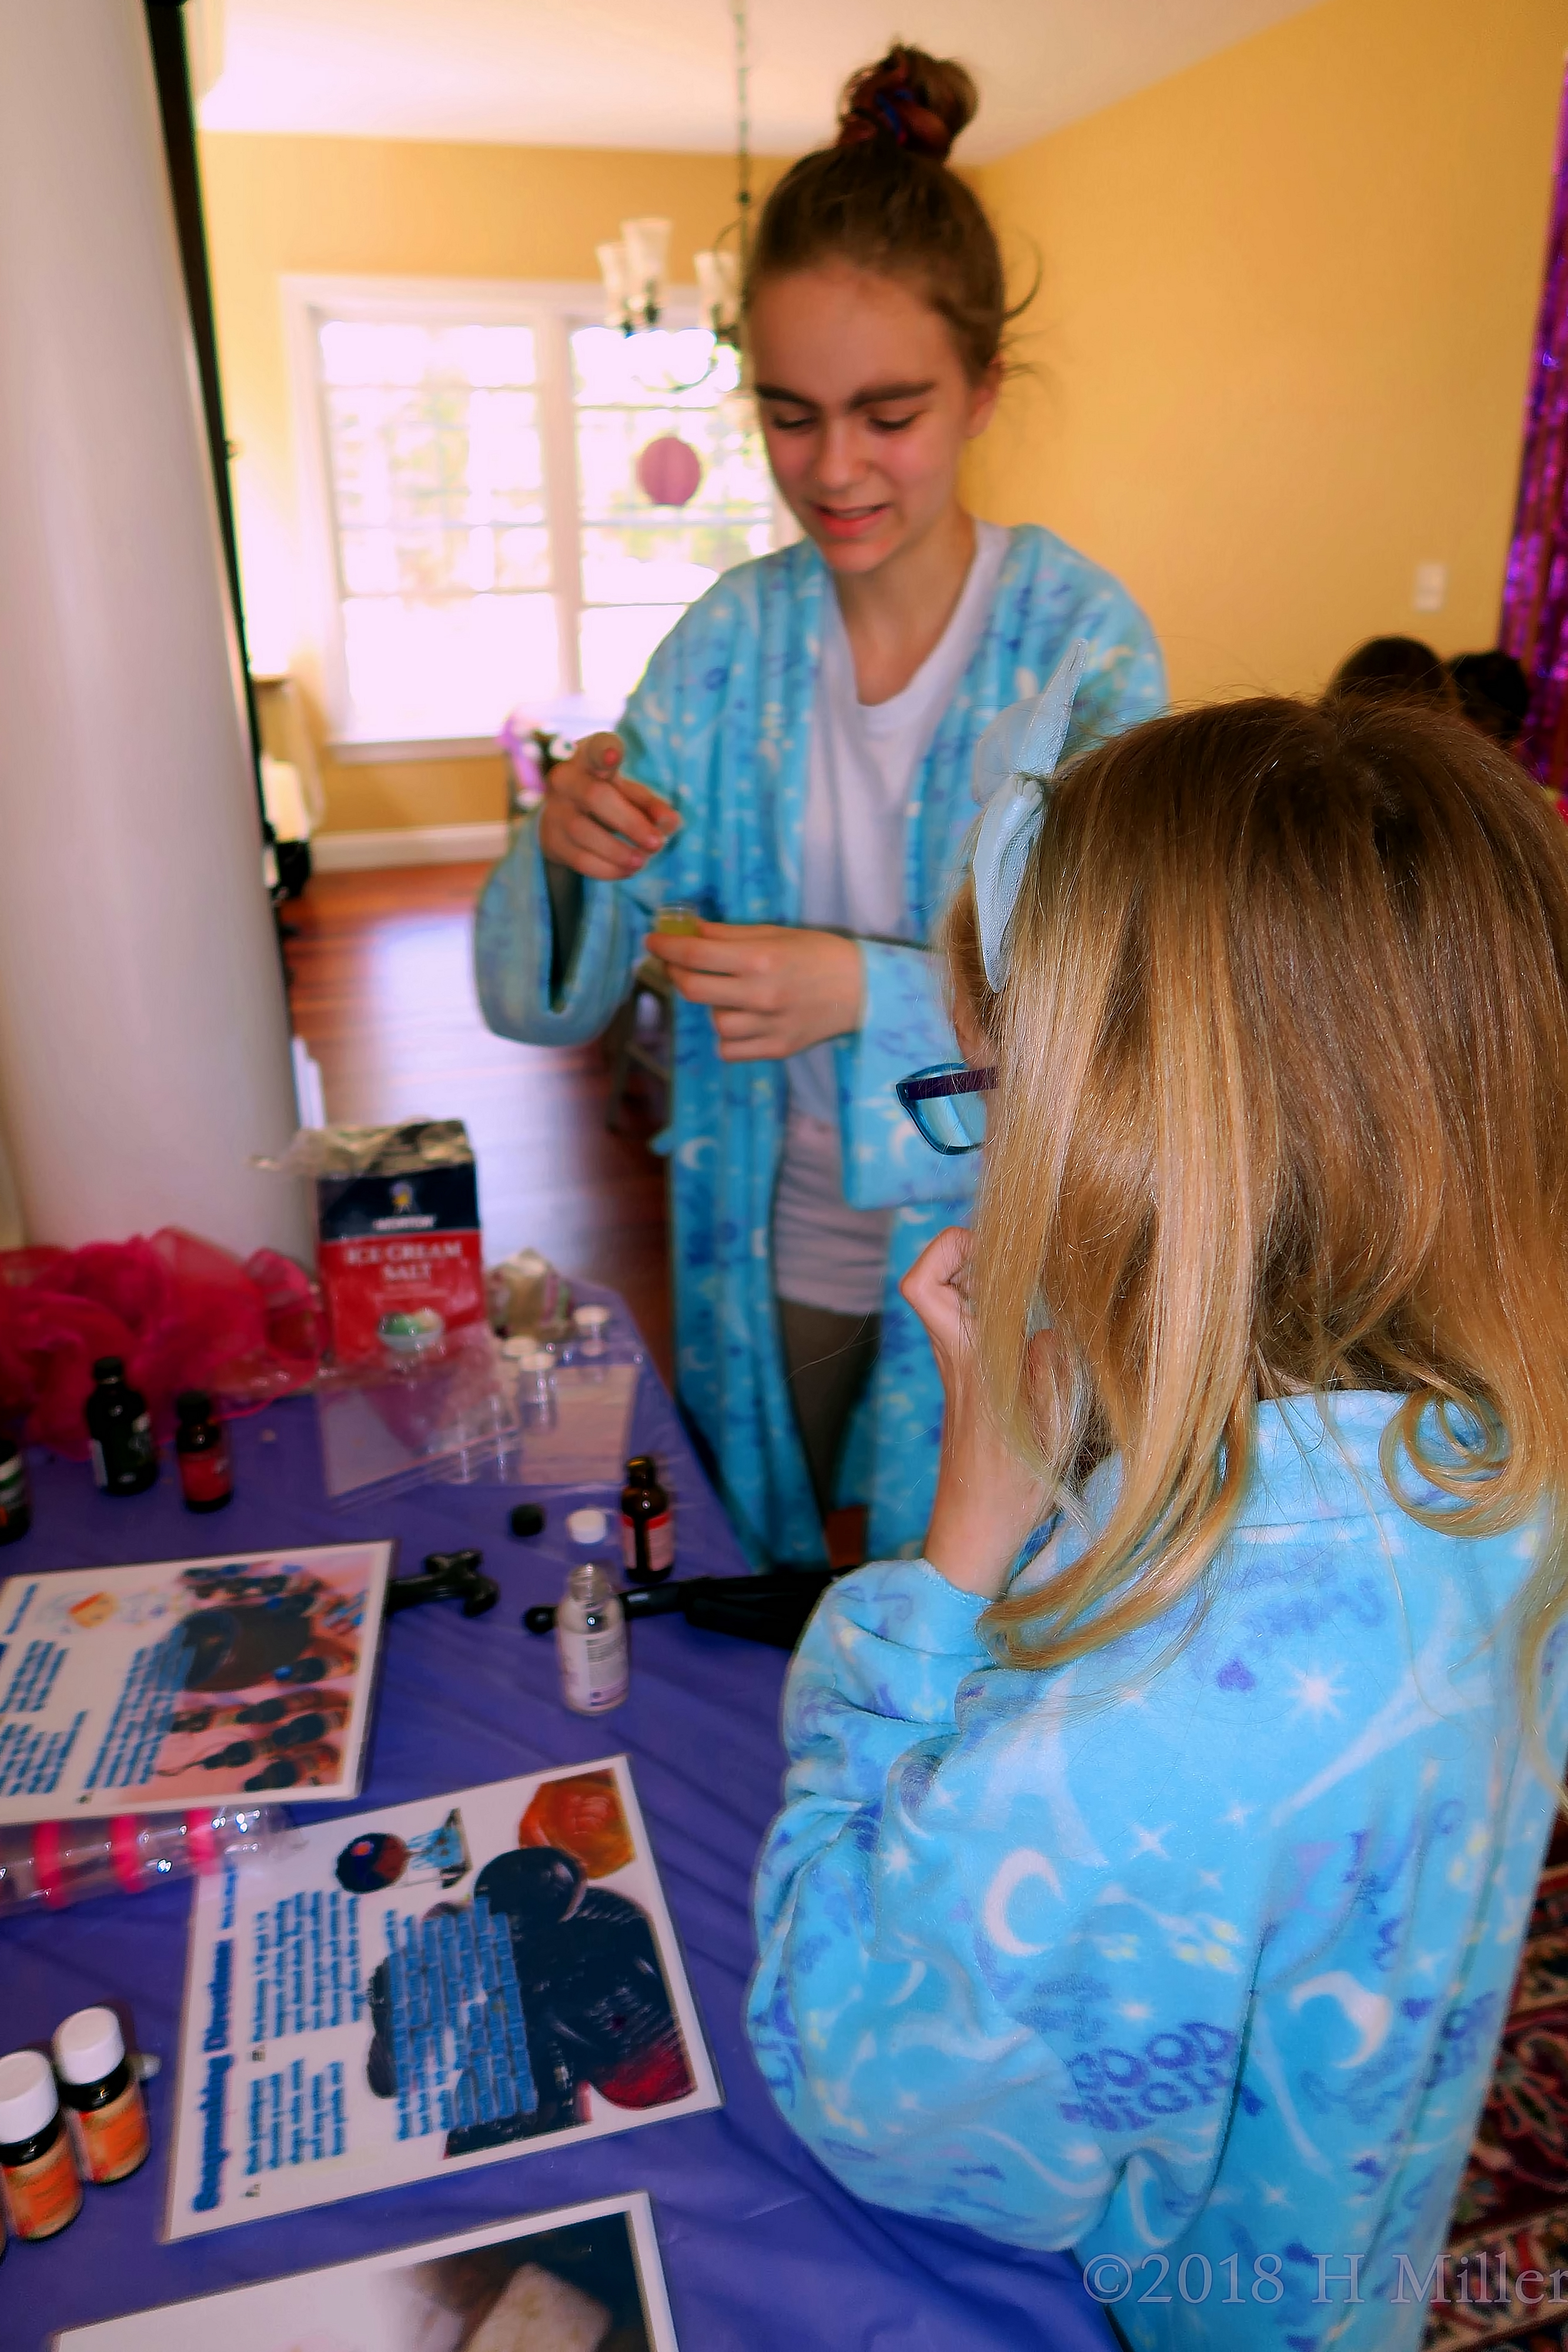 Guiding The Girls In Making Their Kids Crafts At The Kids Spa! 